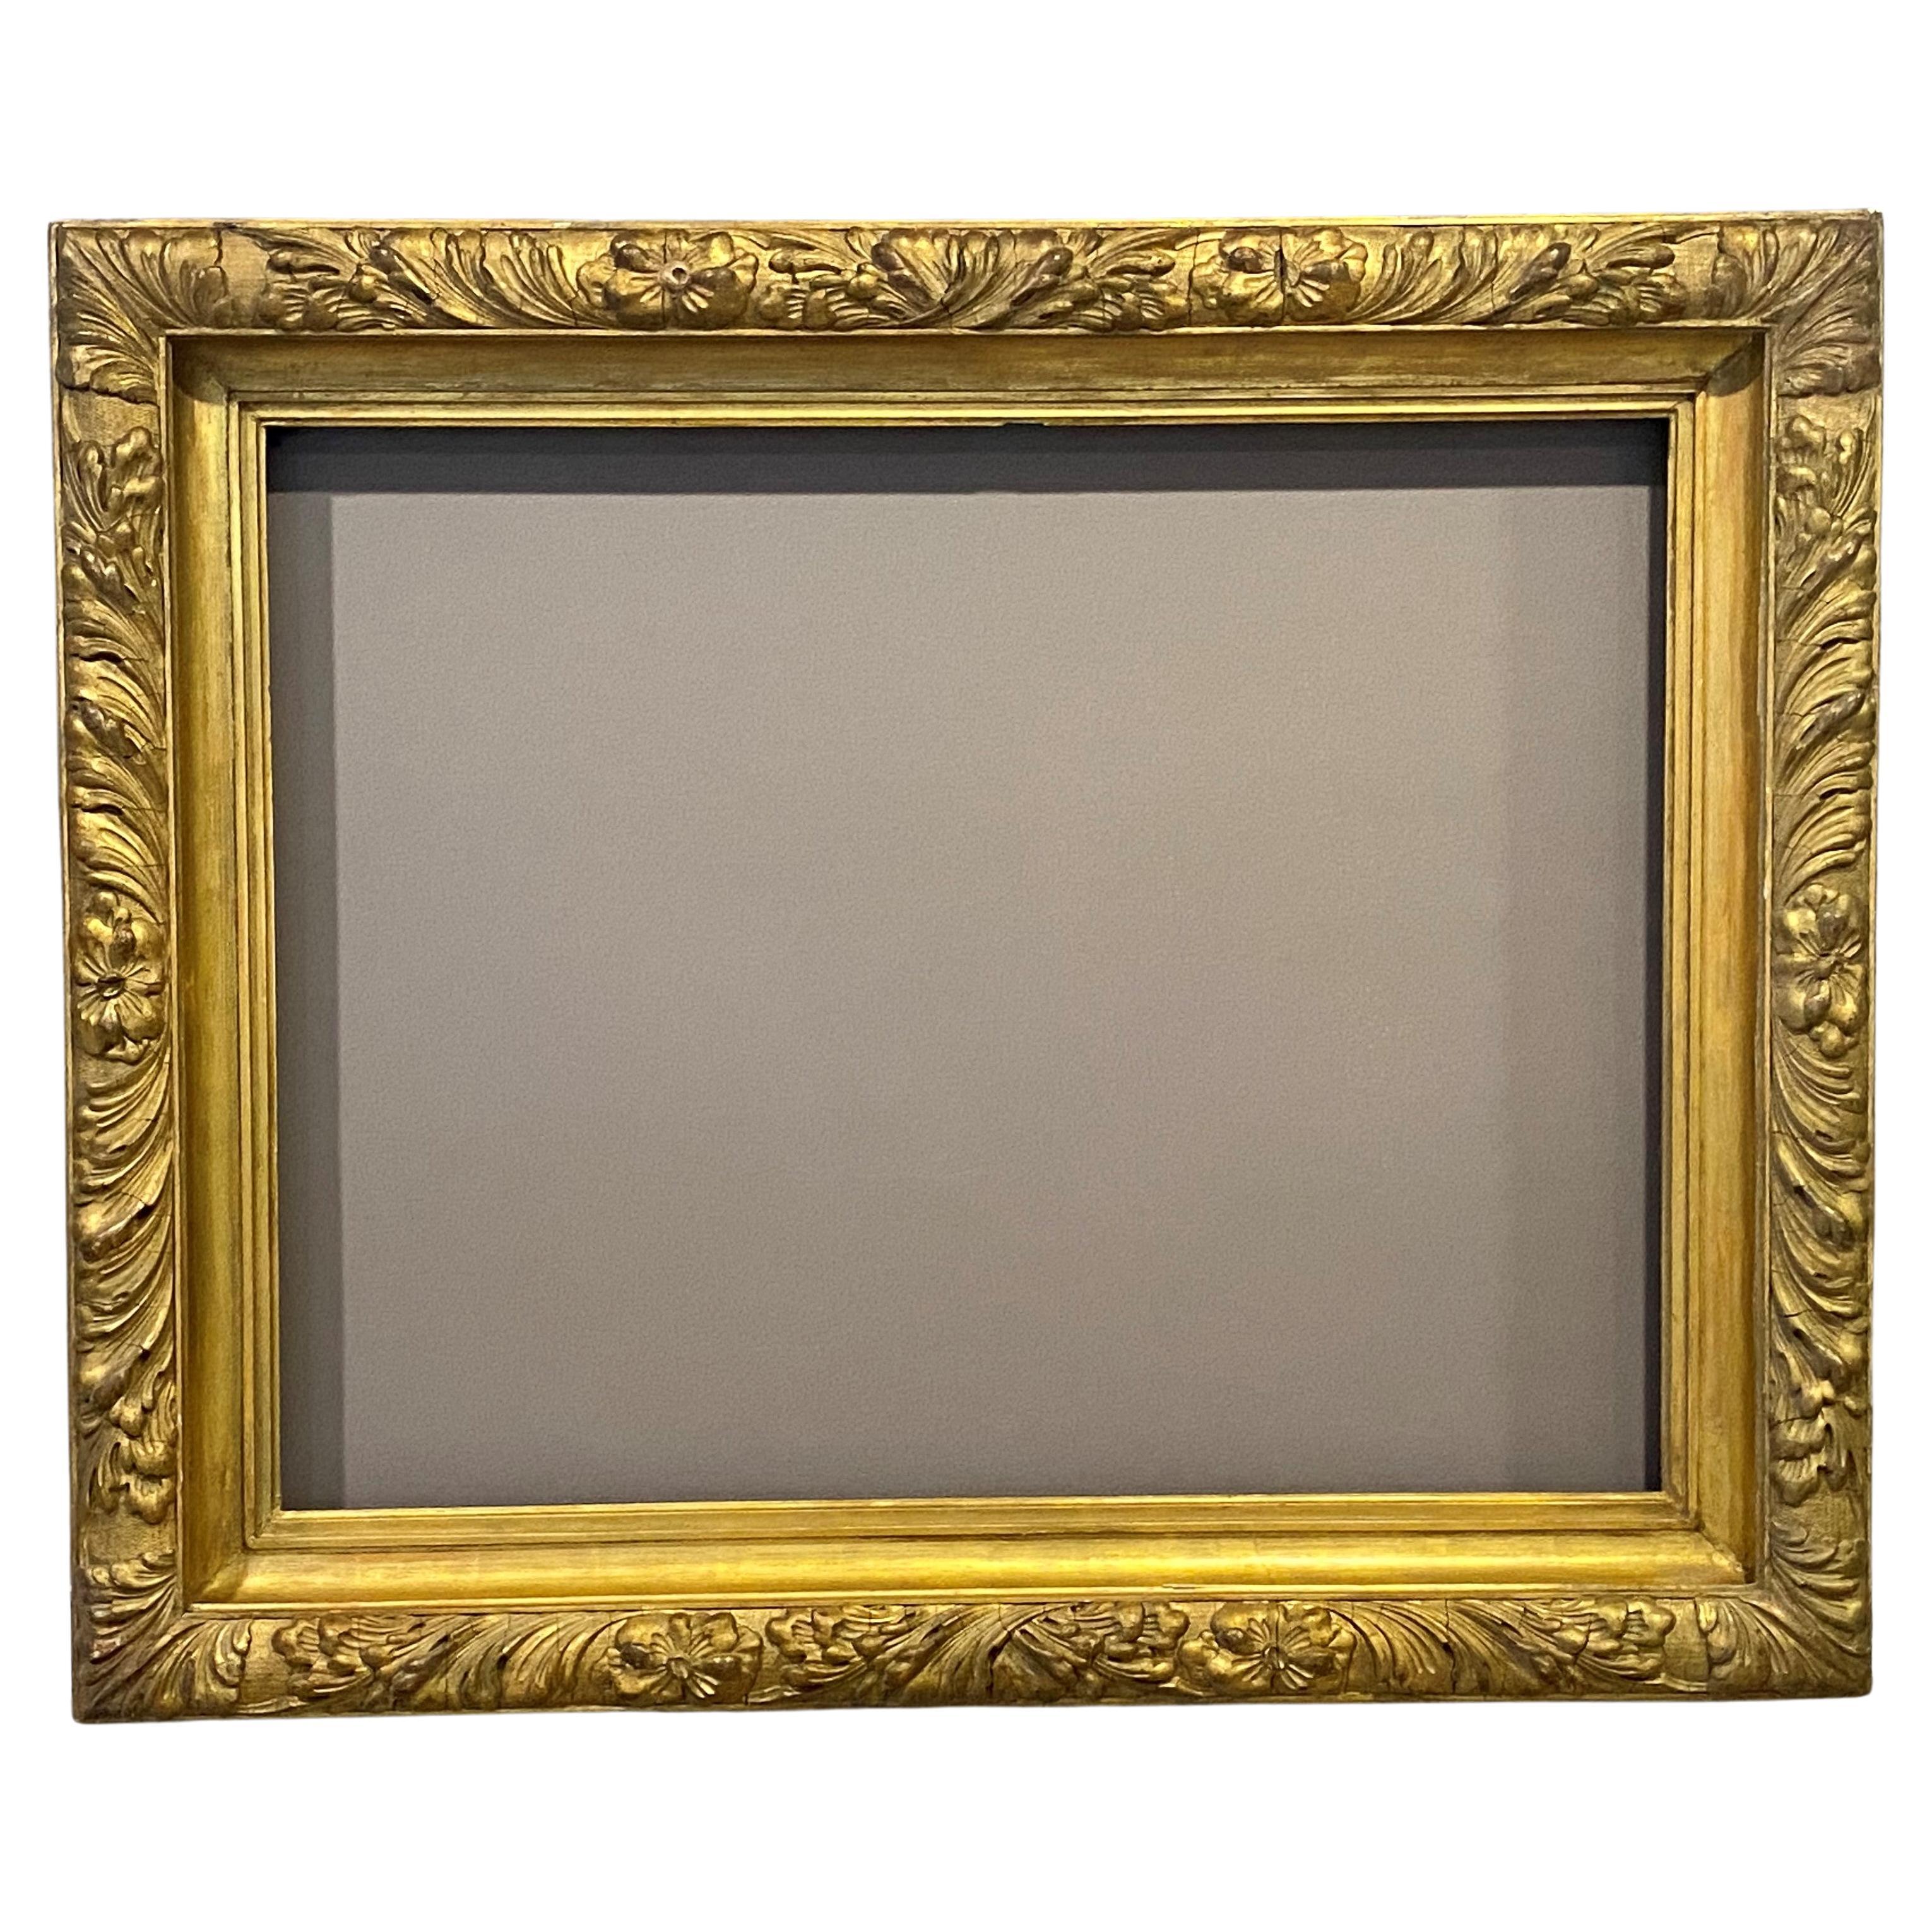 Beaux Arts Gold Leaf and Gesso Frame, likely British, circa 1880-90 For Sale